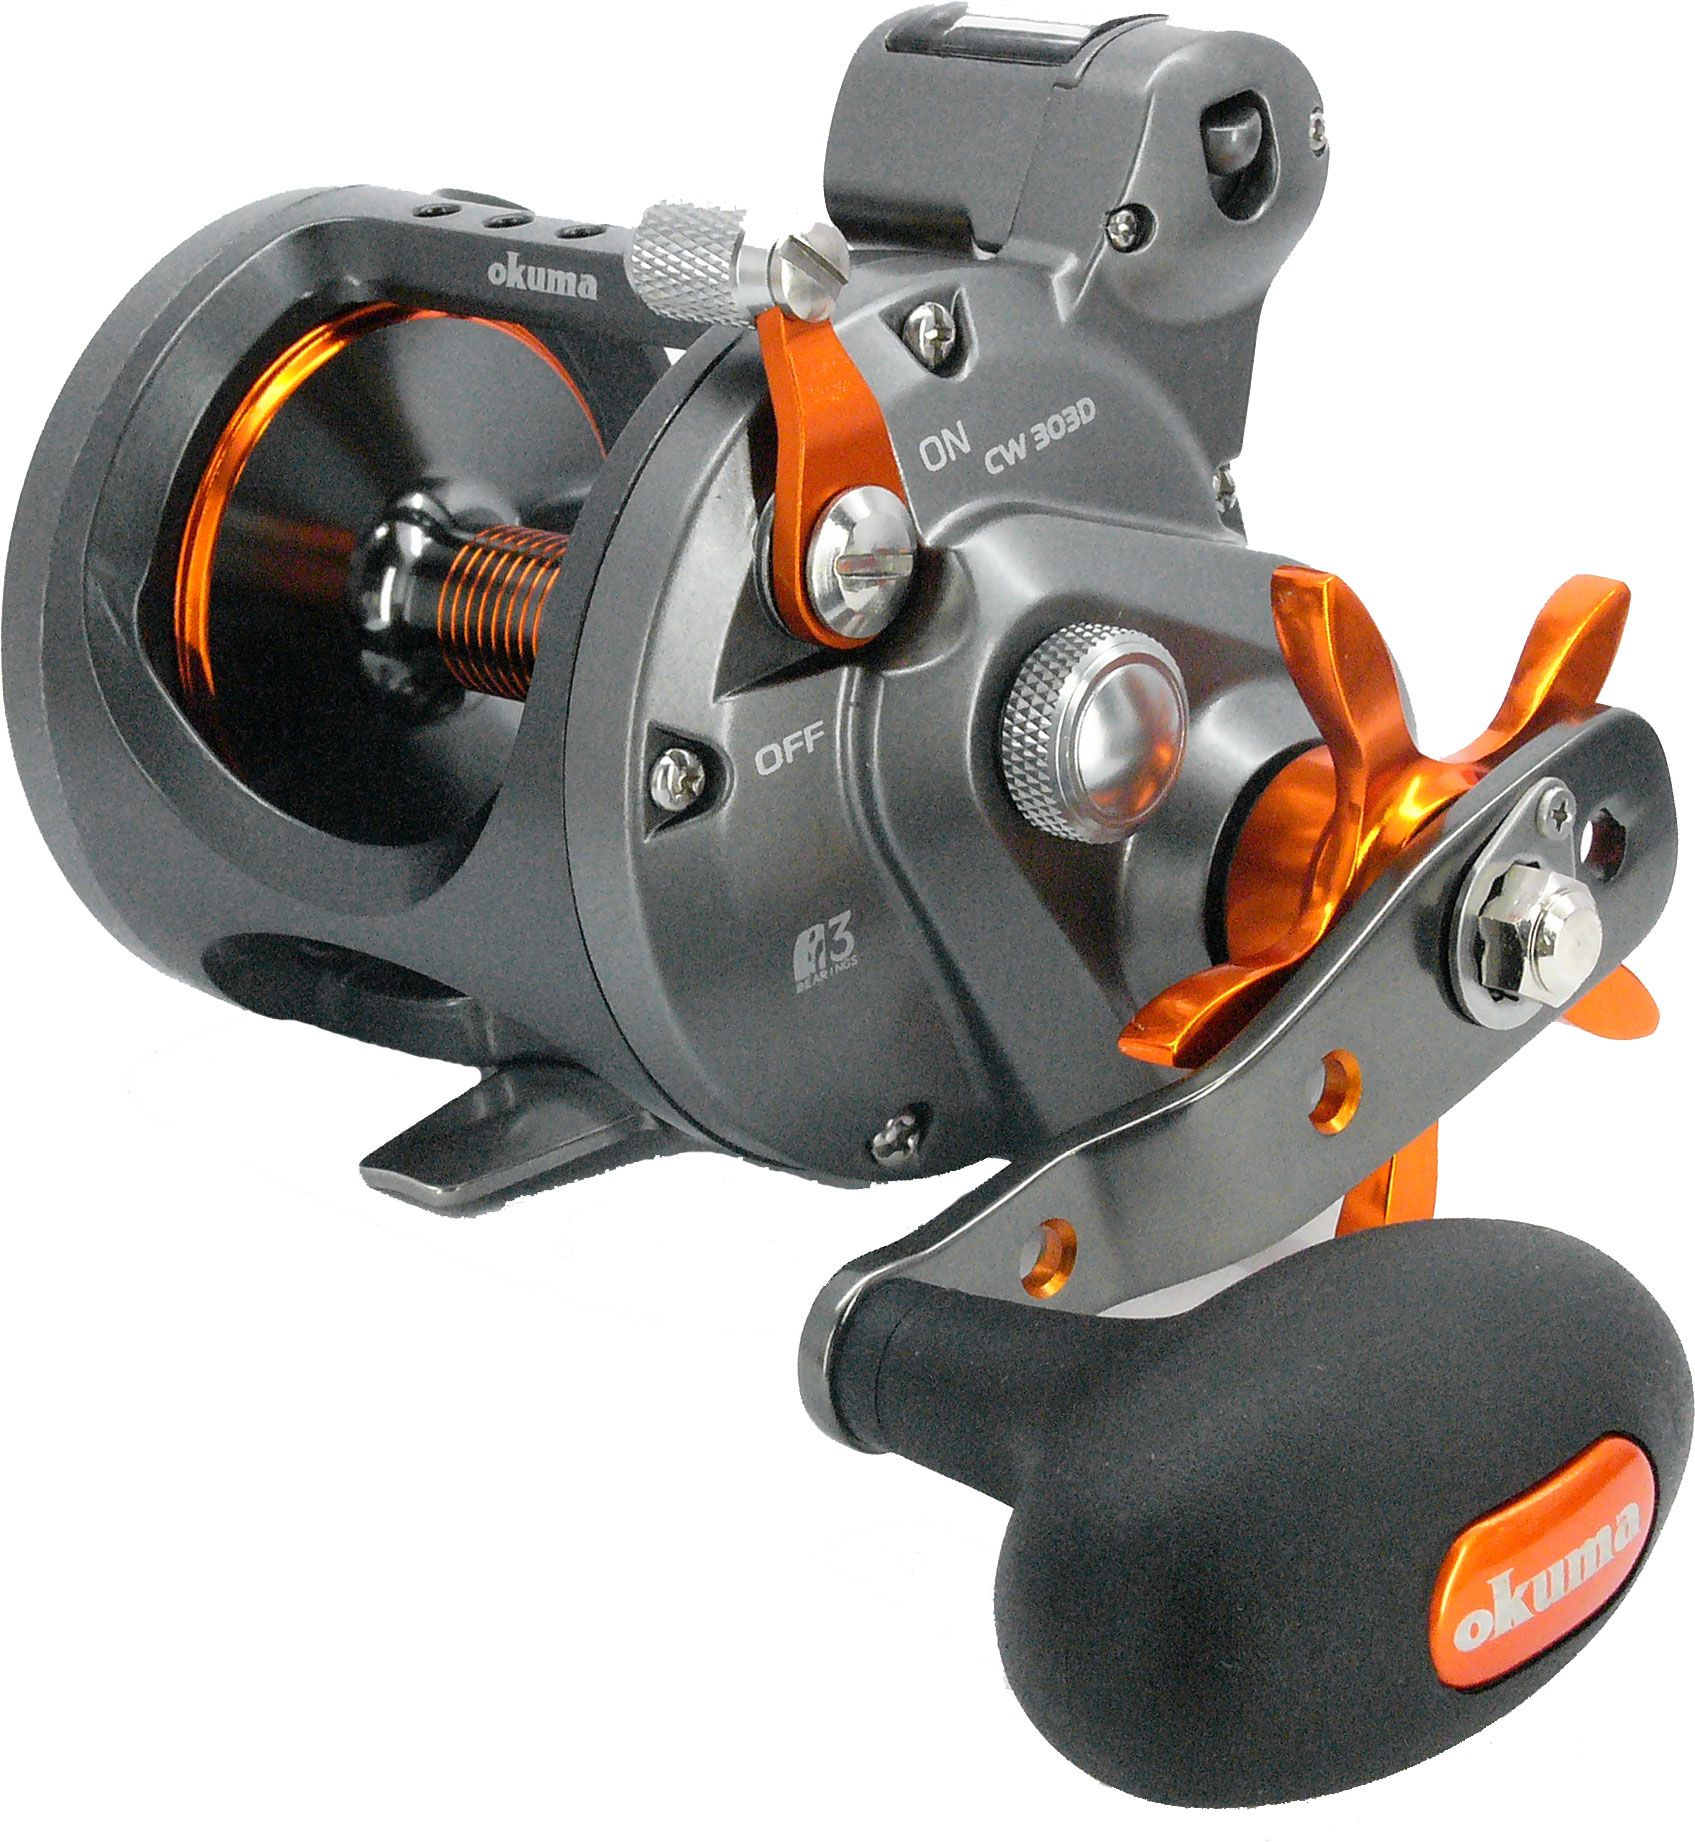 Okuma Cold Water Line Counter Reels, Right Hand - 731114, Trolling